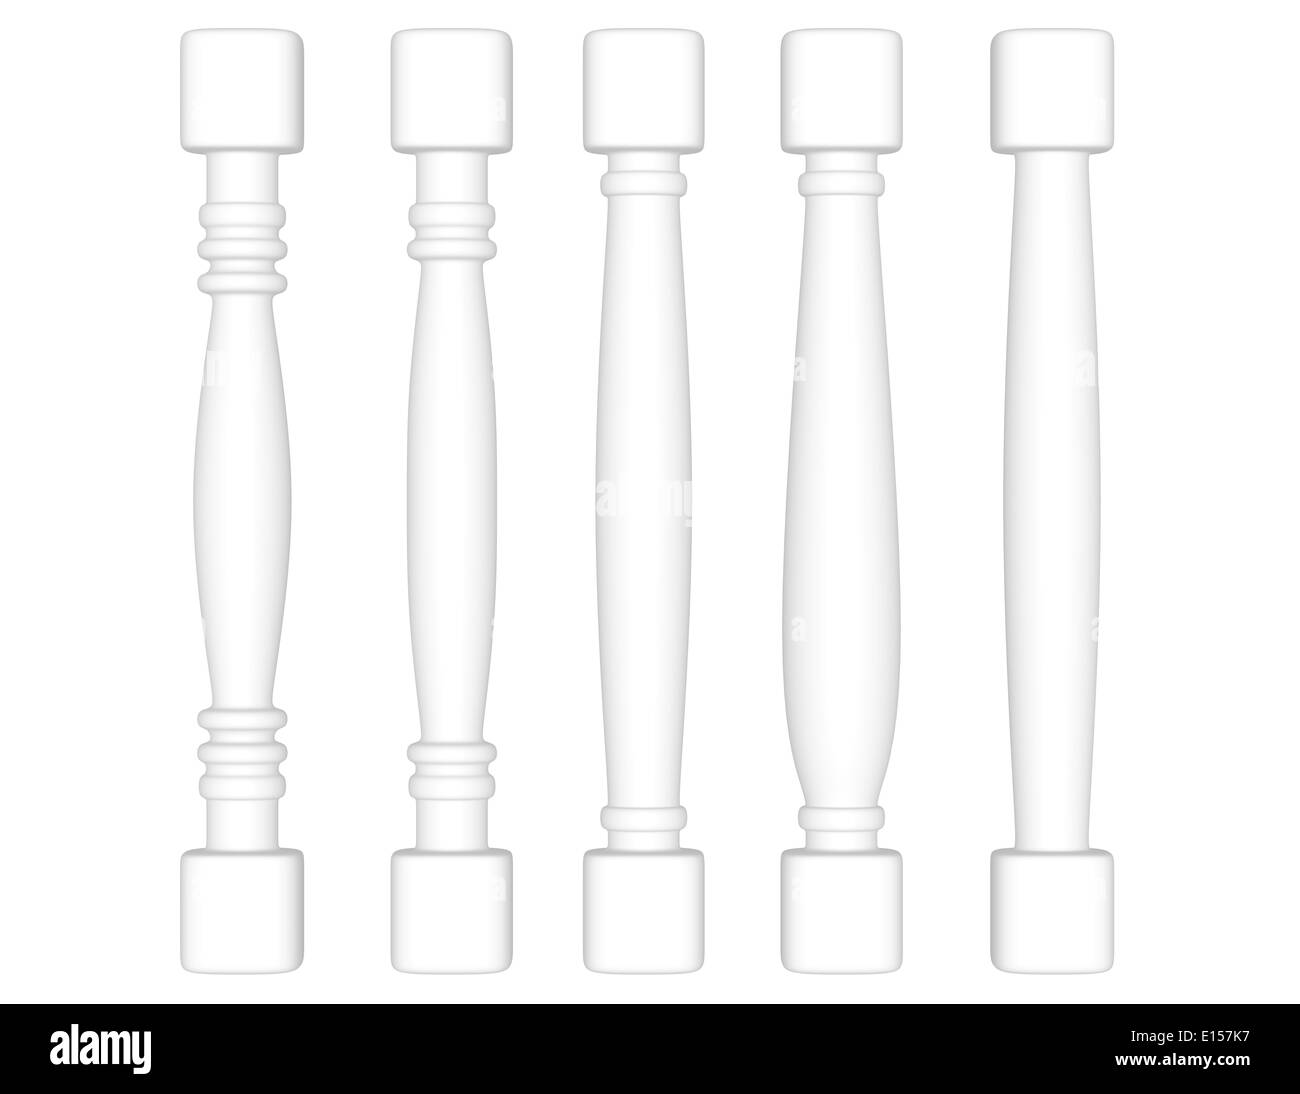 3d Render of Different Spindles Stock Photo